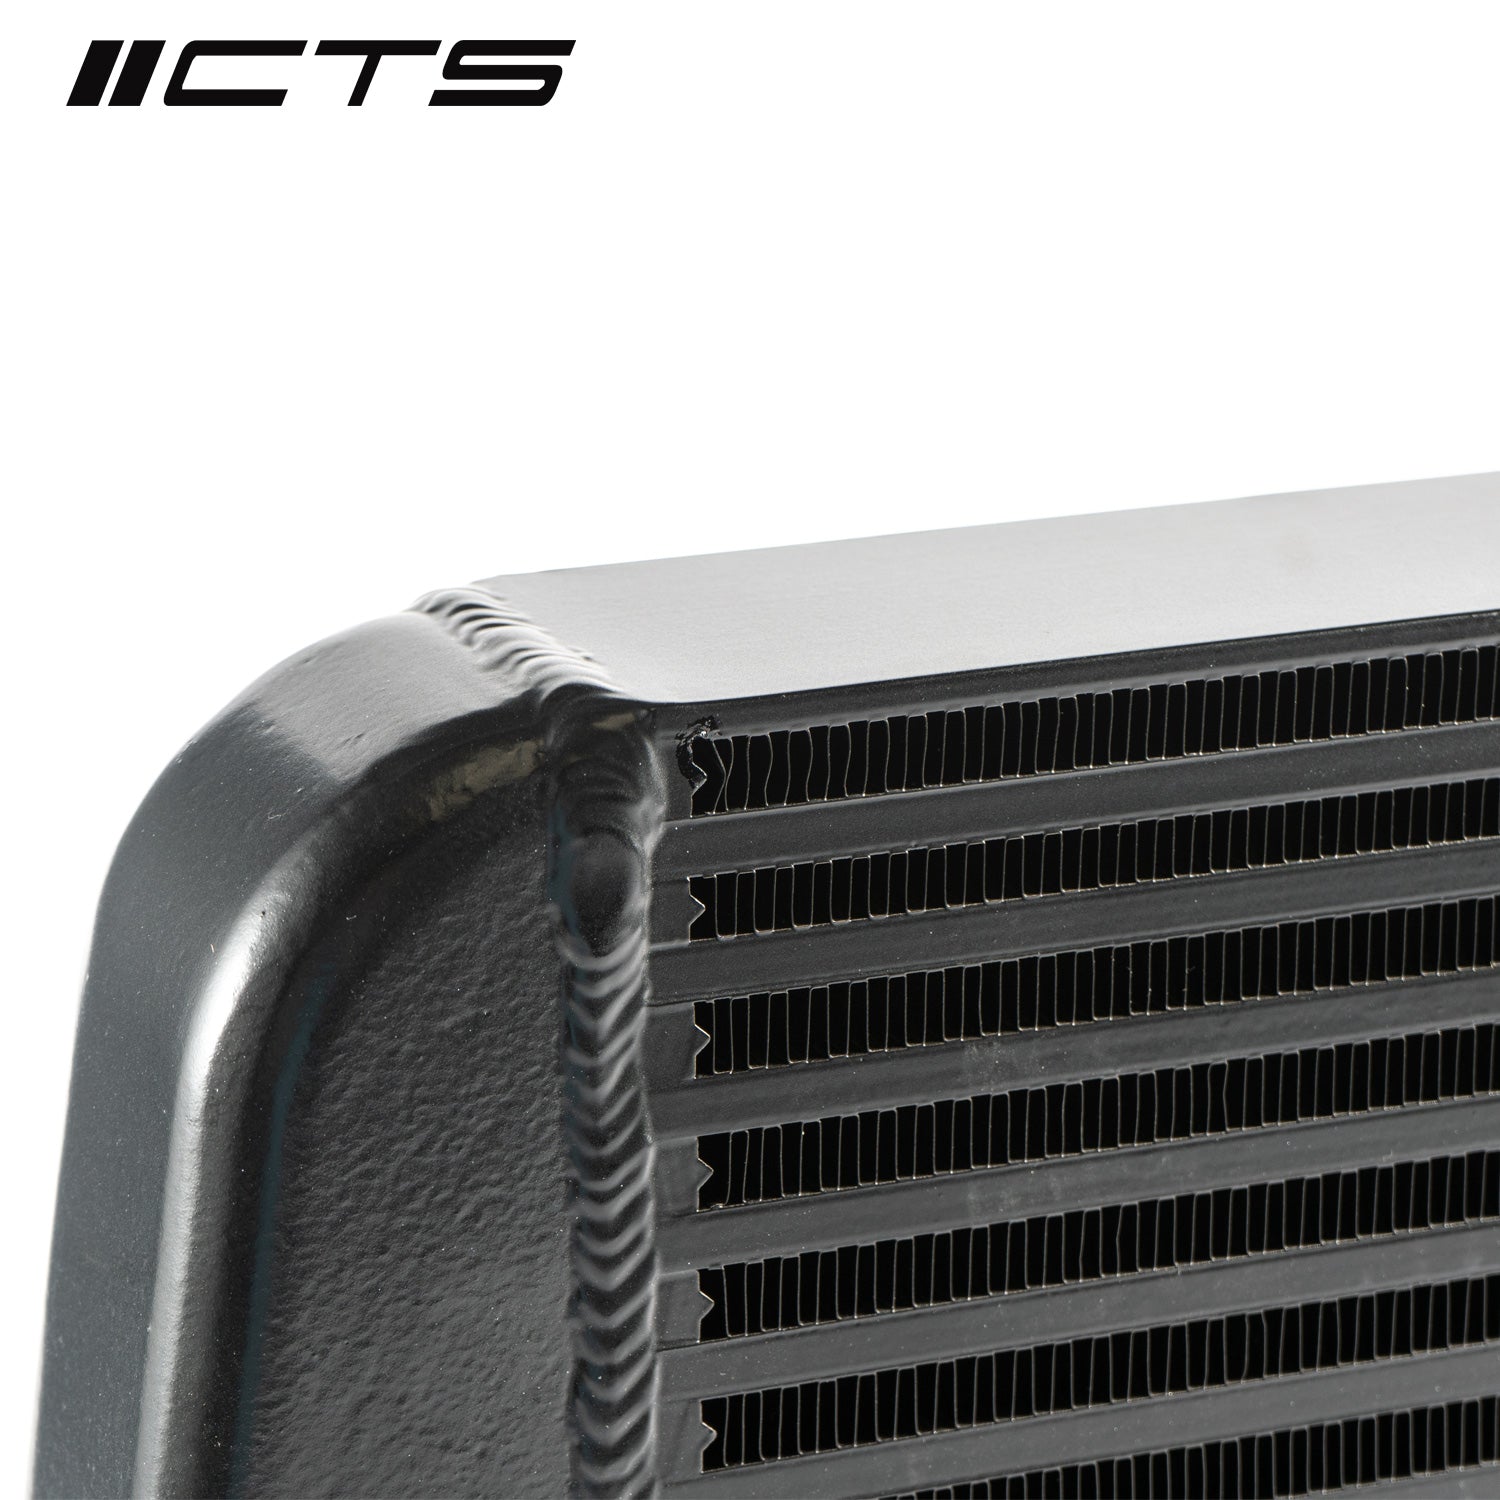 CTS TURBO B9 AUDI A4, A5, ALLROAD 1.8T/2.0T AND B9 AUDI S4, S5 3.0T UPGRADED INTERCOOLER (DIRECT FIT)